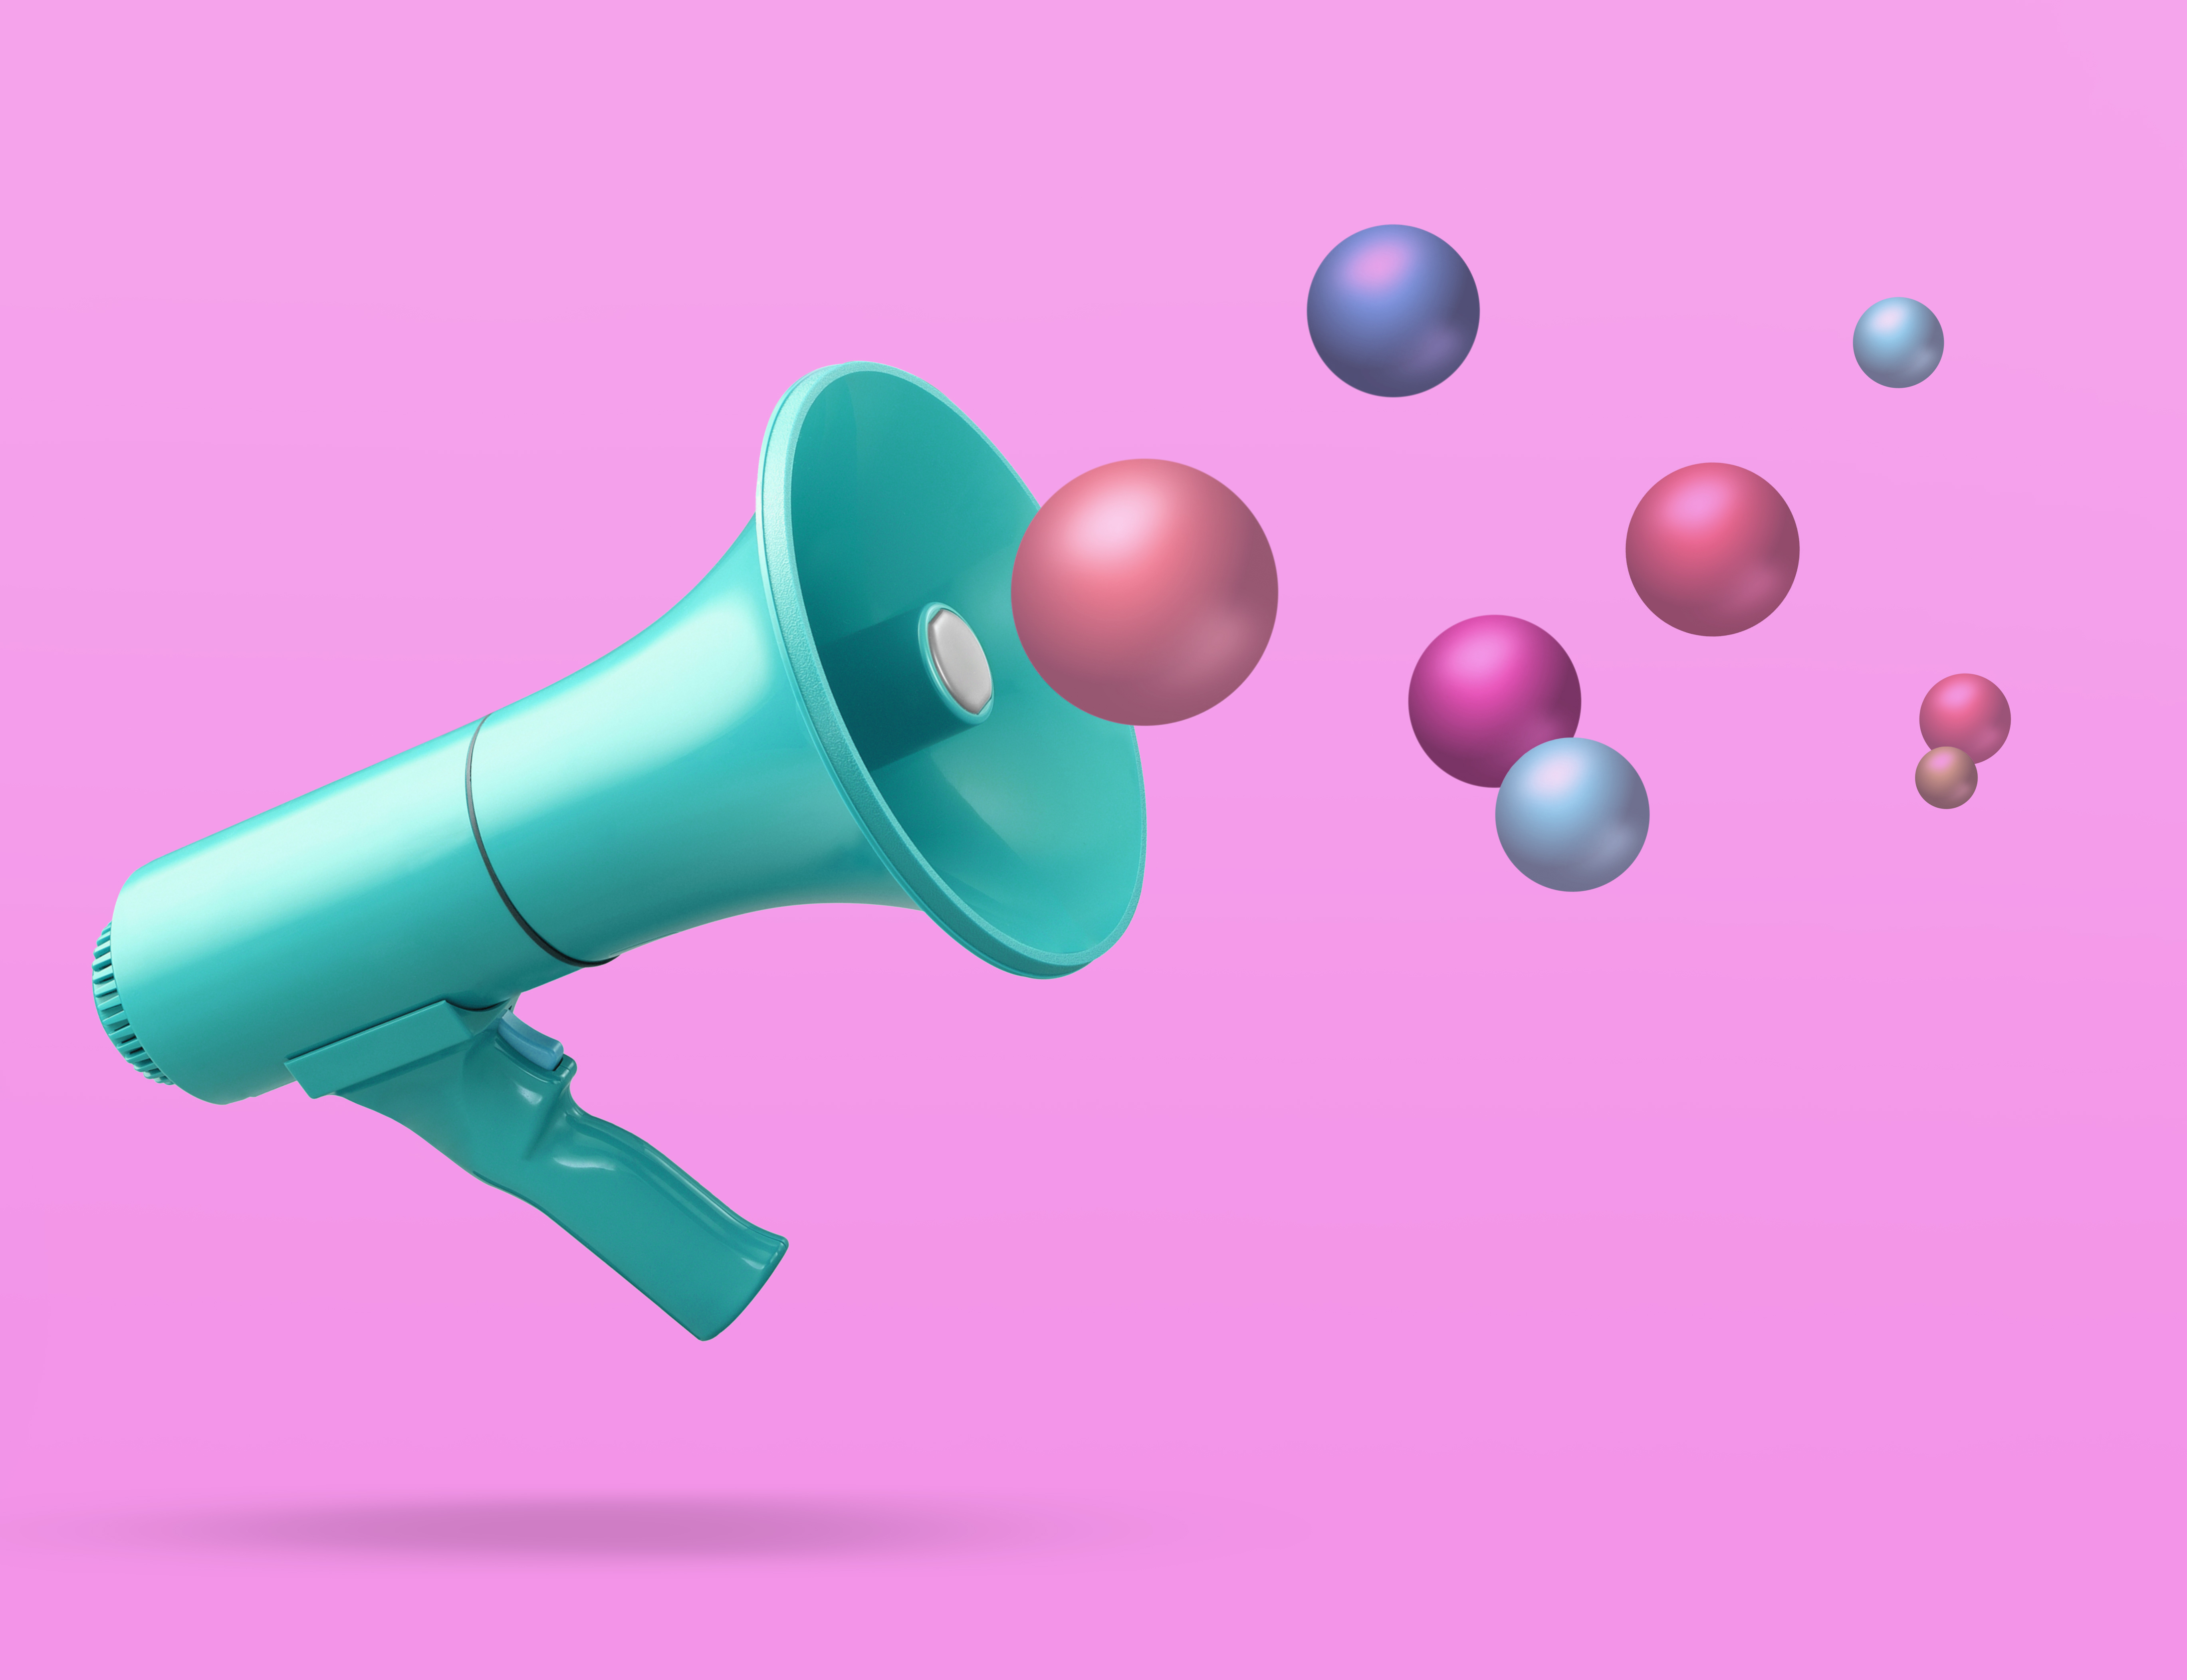 Image of a megaphone on a pink background with colorful balls in the air to represent marketing.